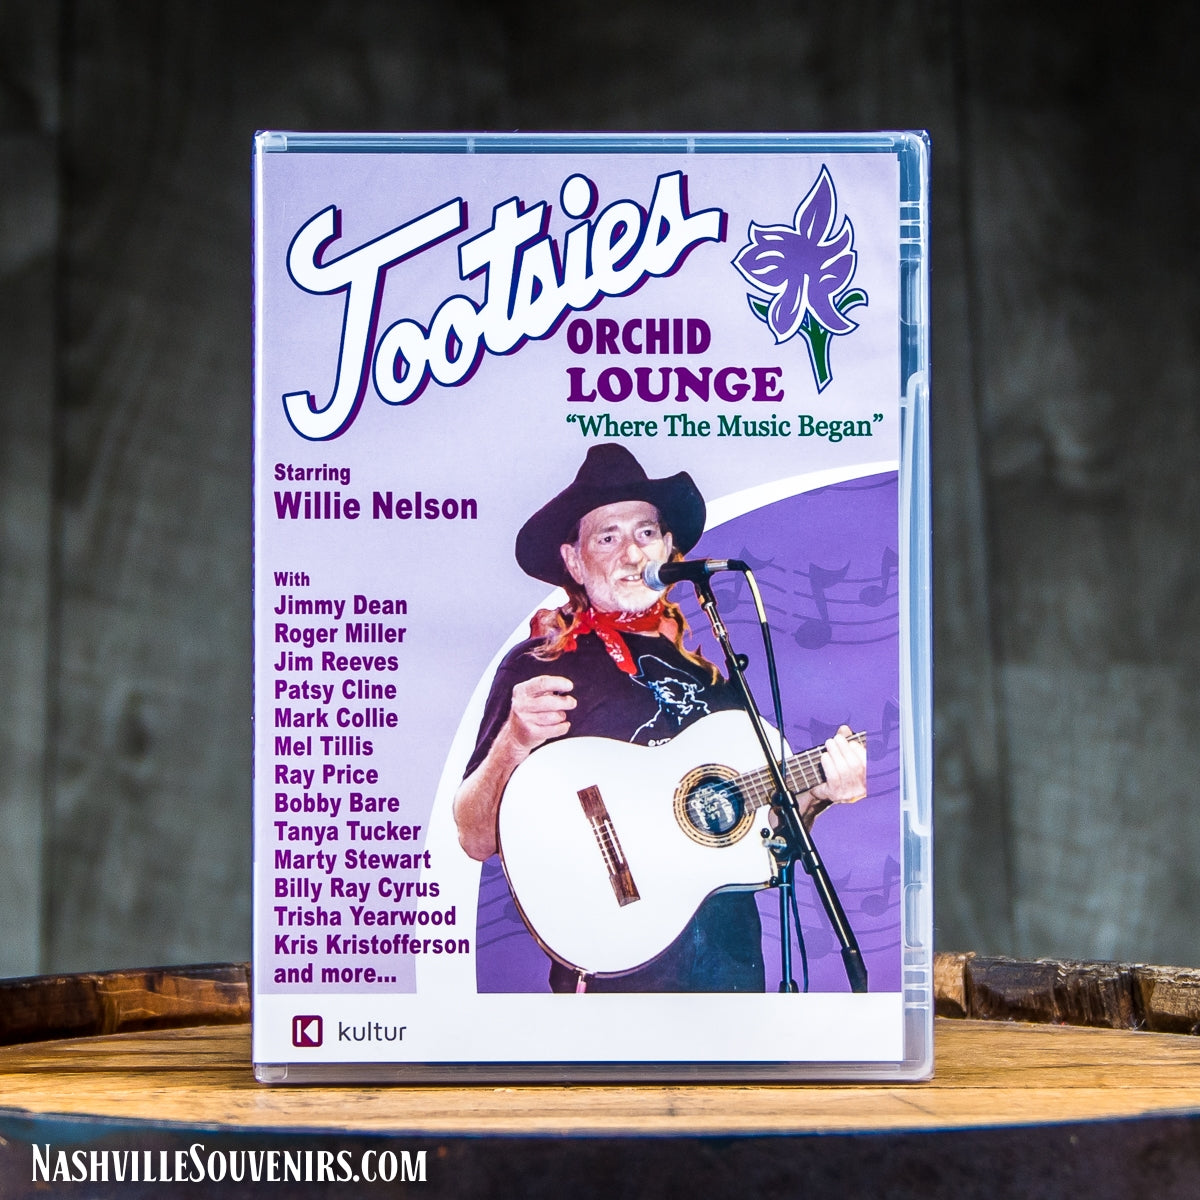 Willie Nelson DVD "Tootsie's Orchid Lounge"